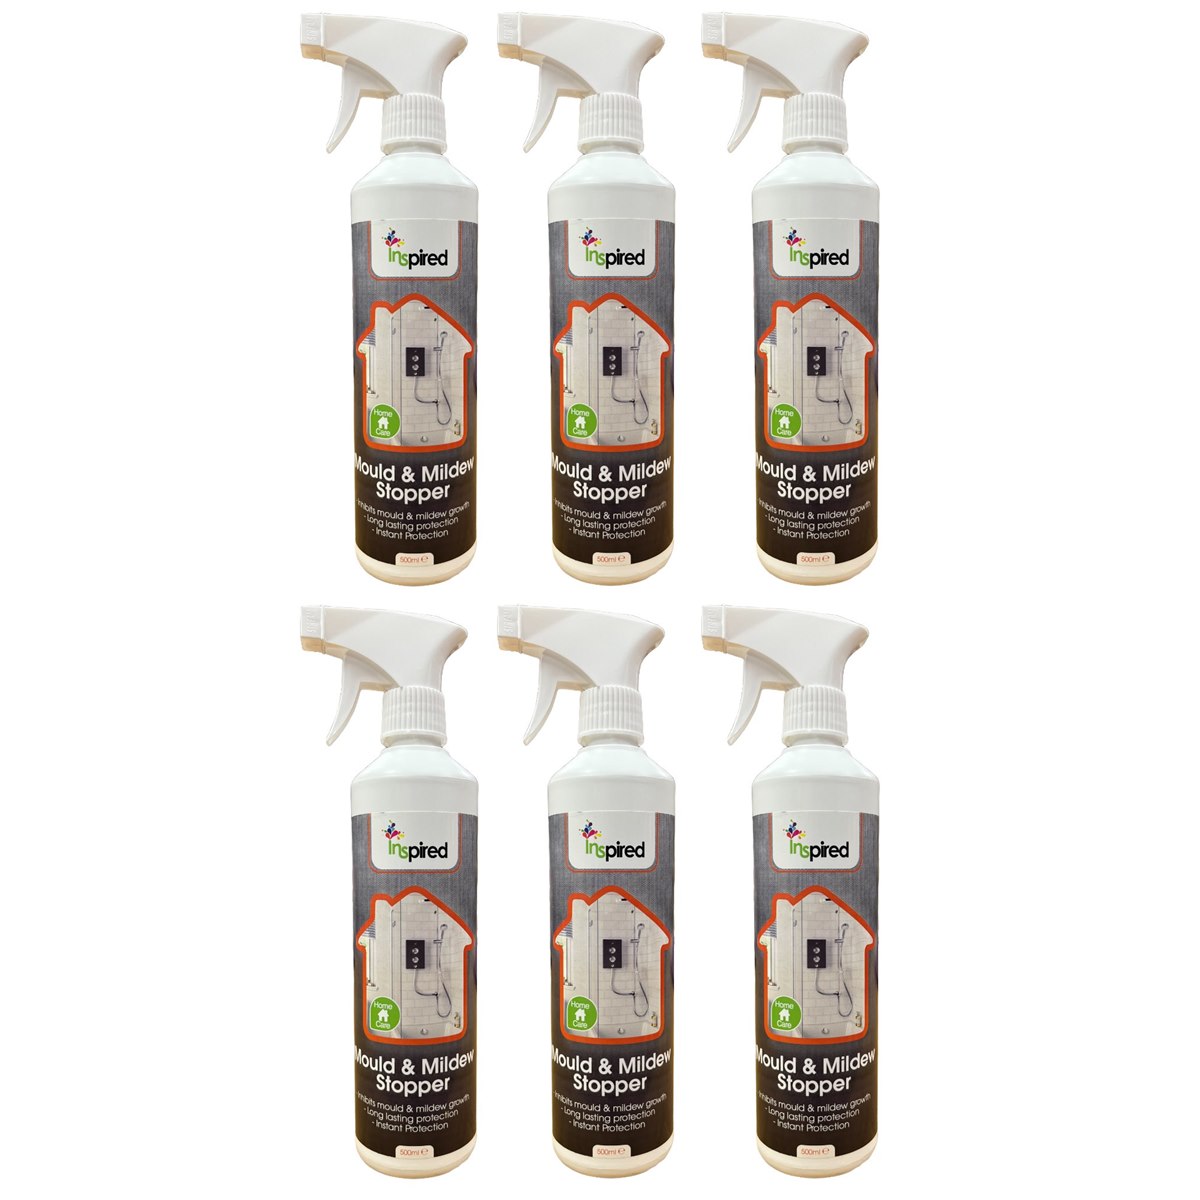 Case of 6 x Inspired Mould and Mildew Stopper Spray 500ml